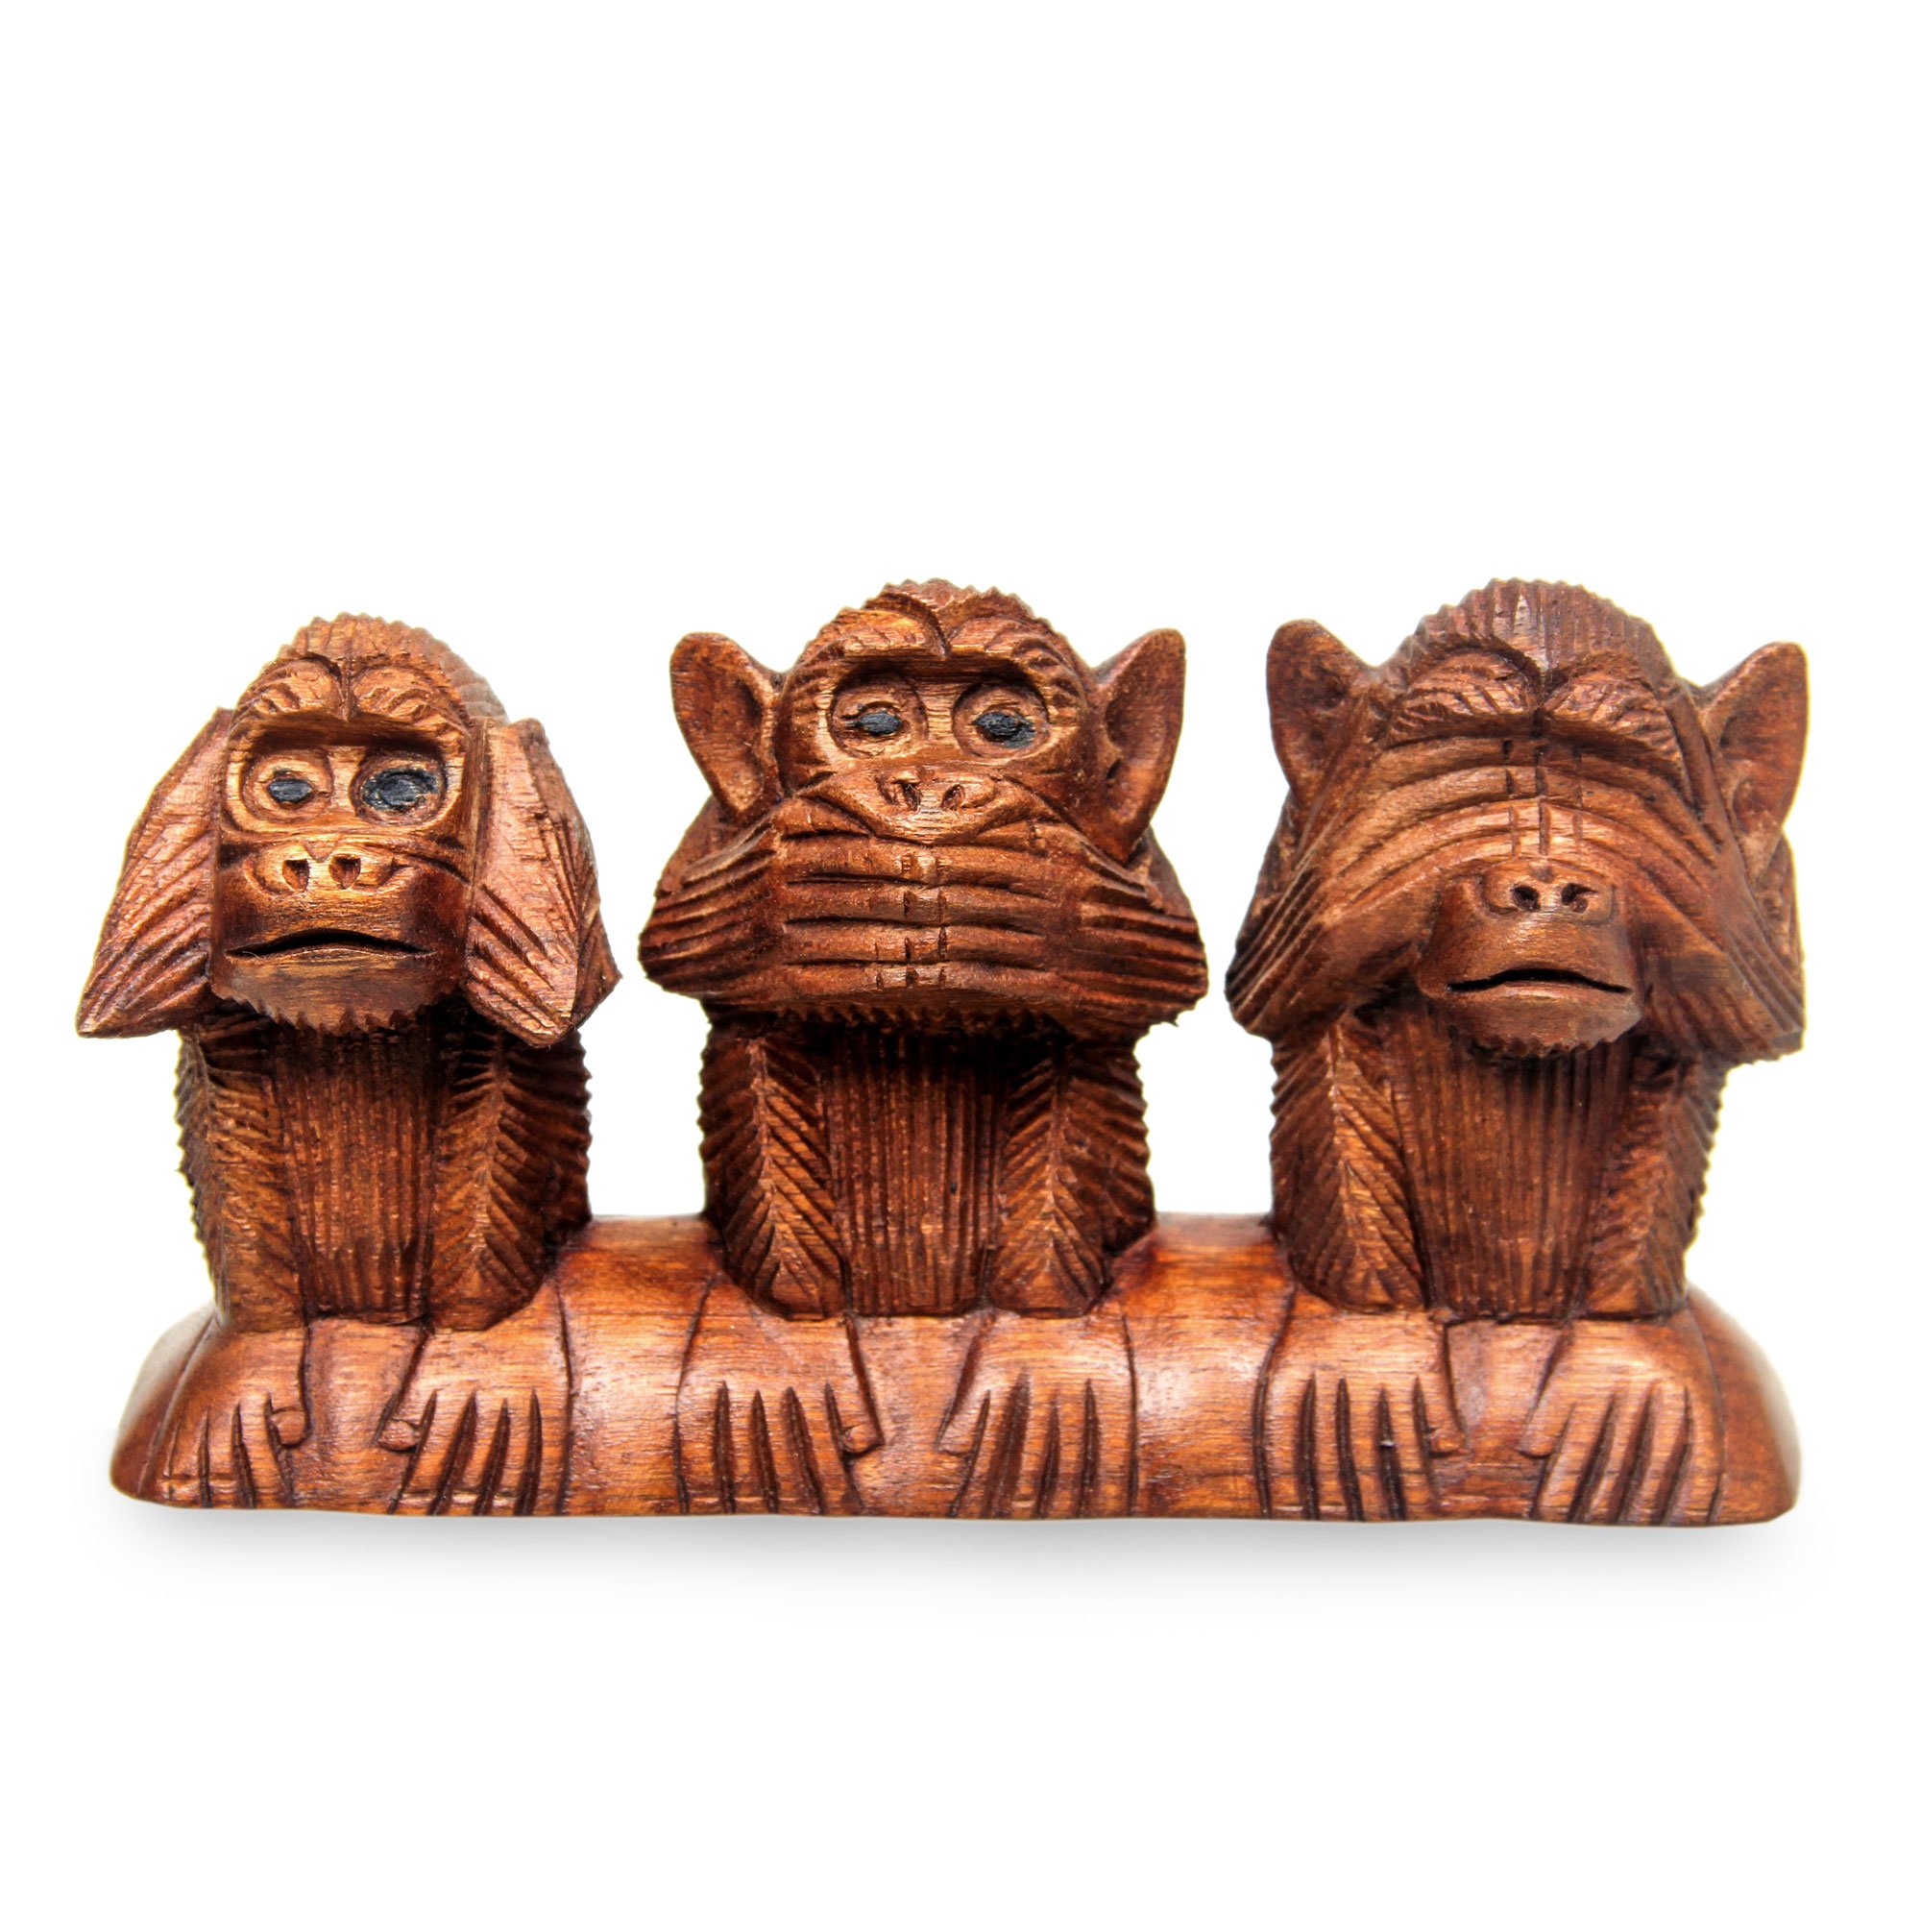 NOVICA Hand Carved Suar Wood Monkey Proverb Sculpture, 4.5" Tall 'Three Wise Monkeys'